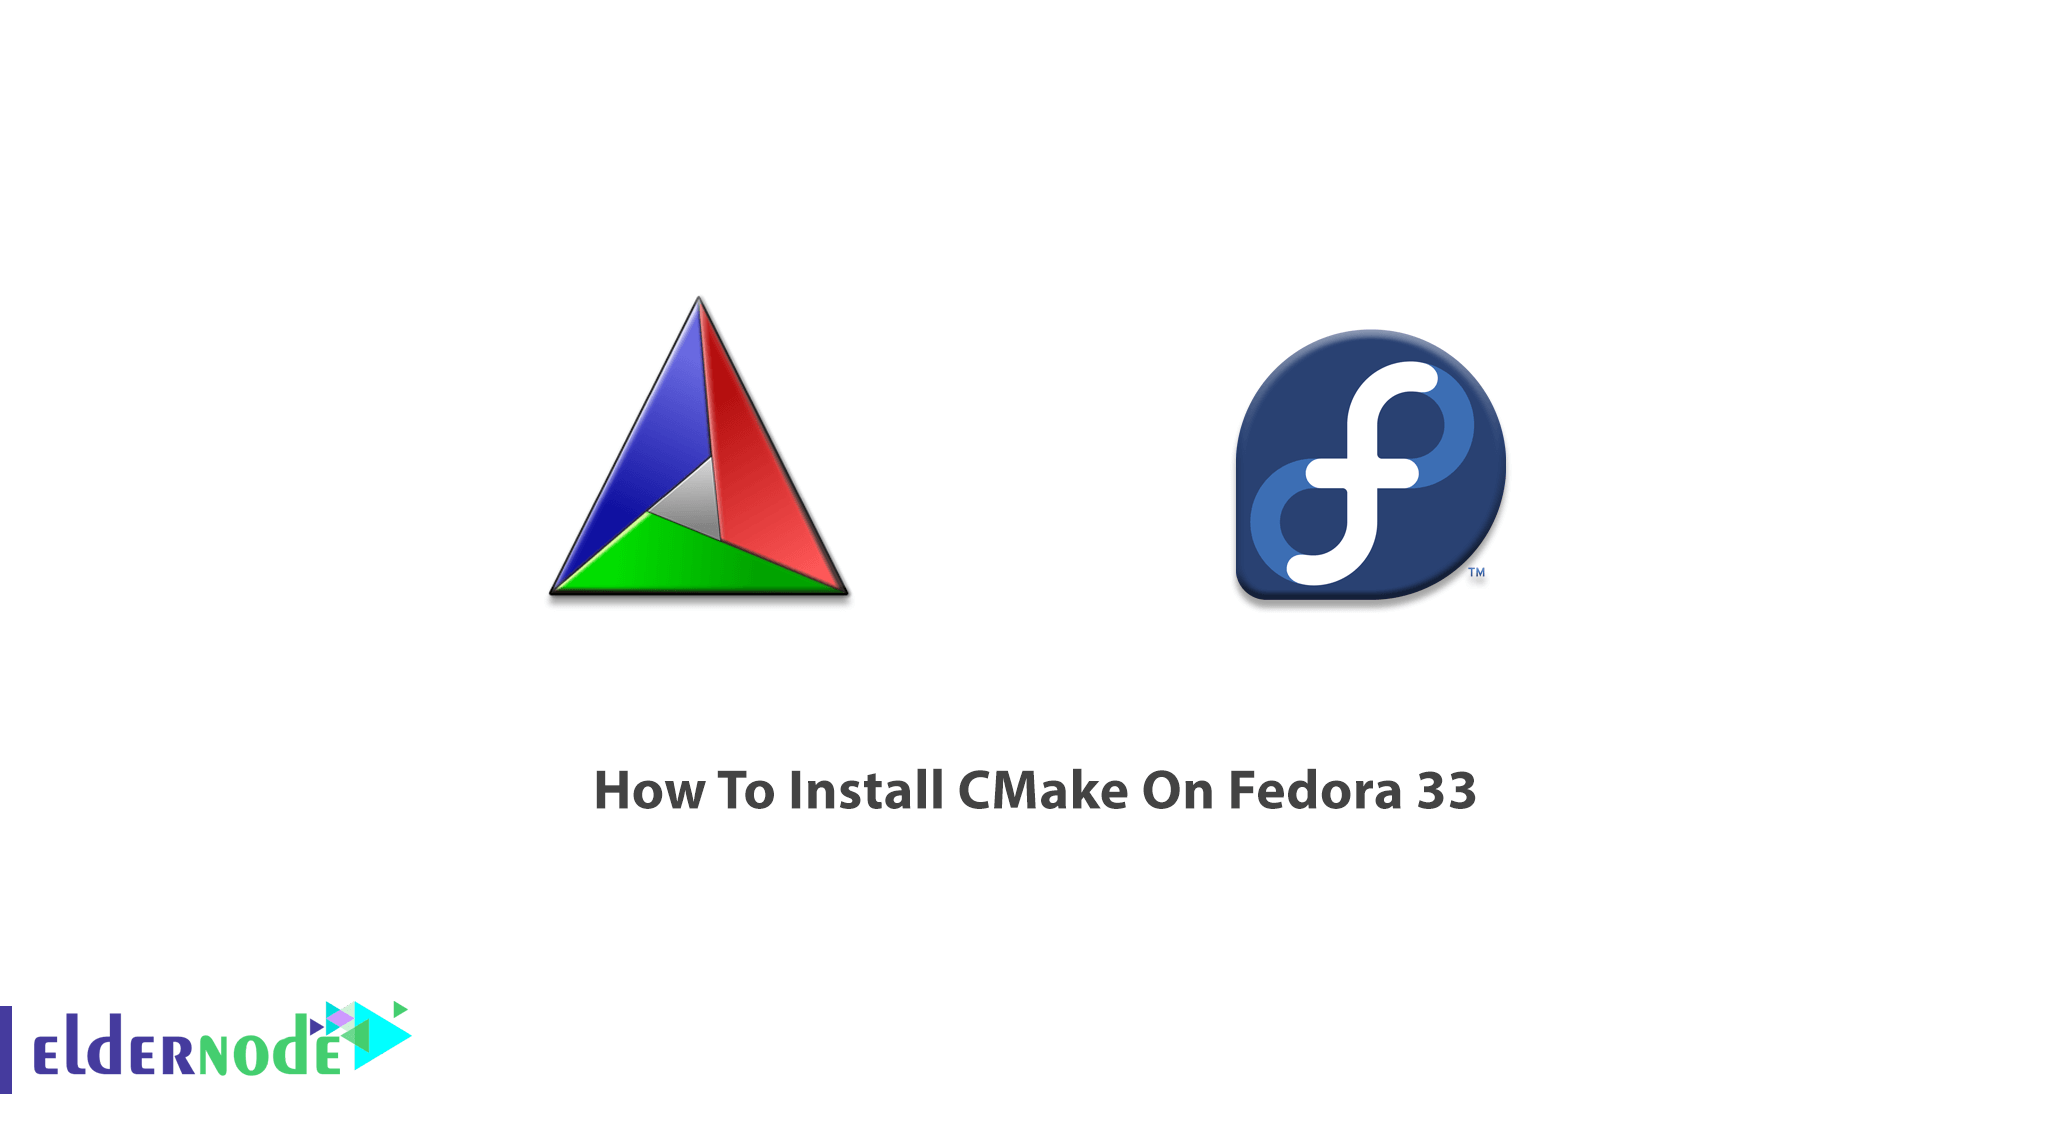 How To Install CMake On Fedora 33